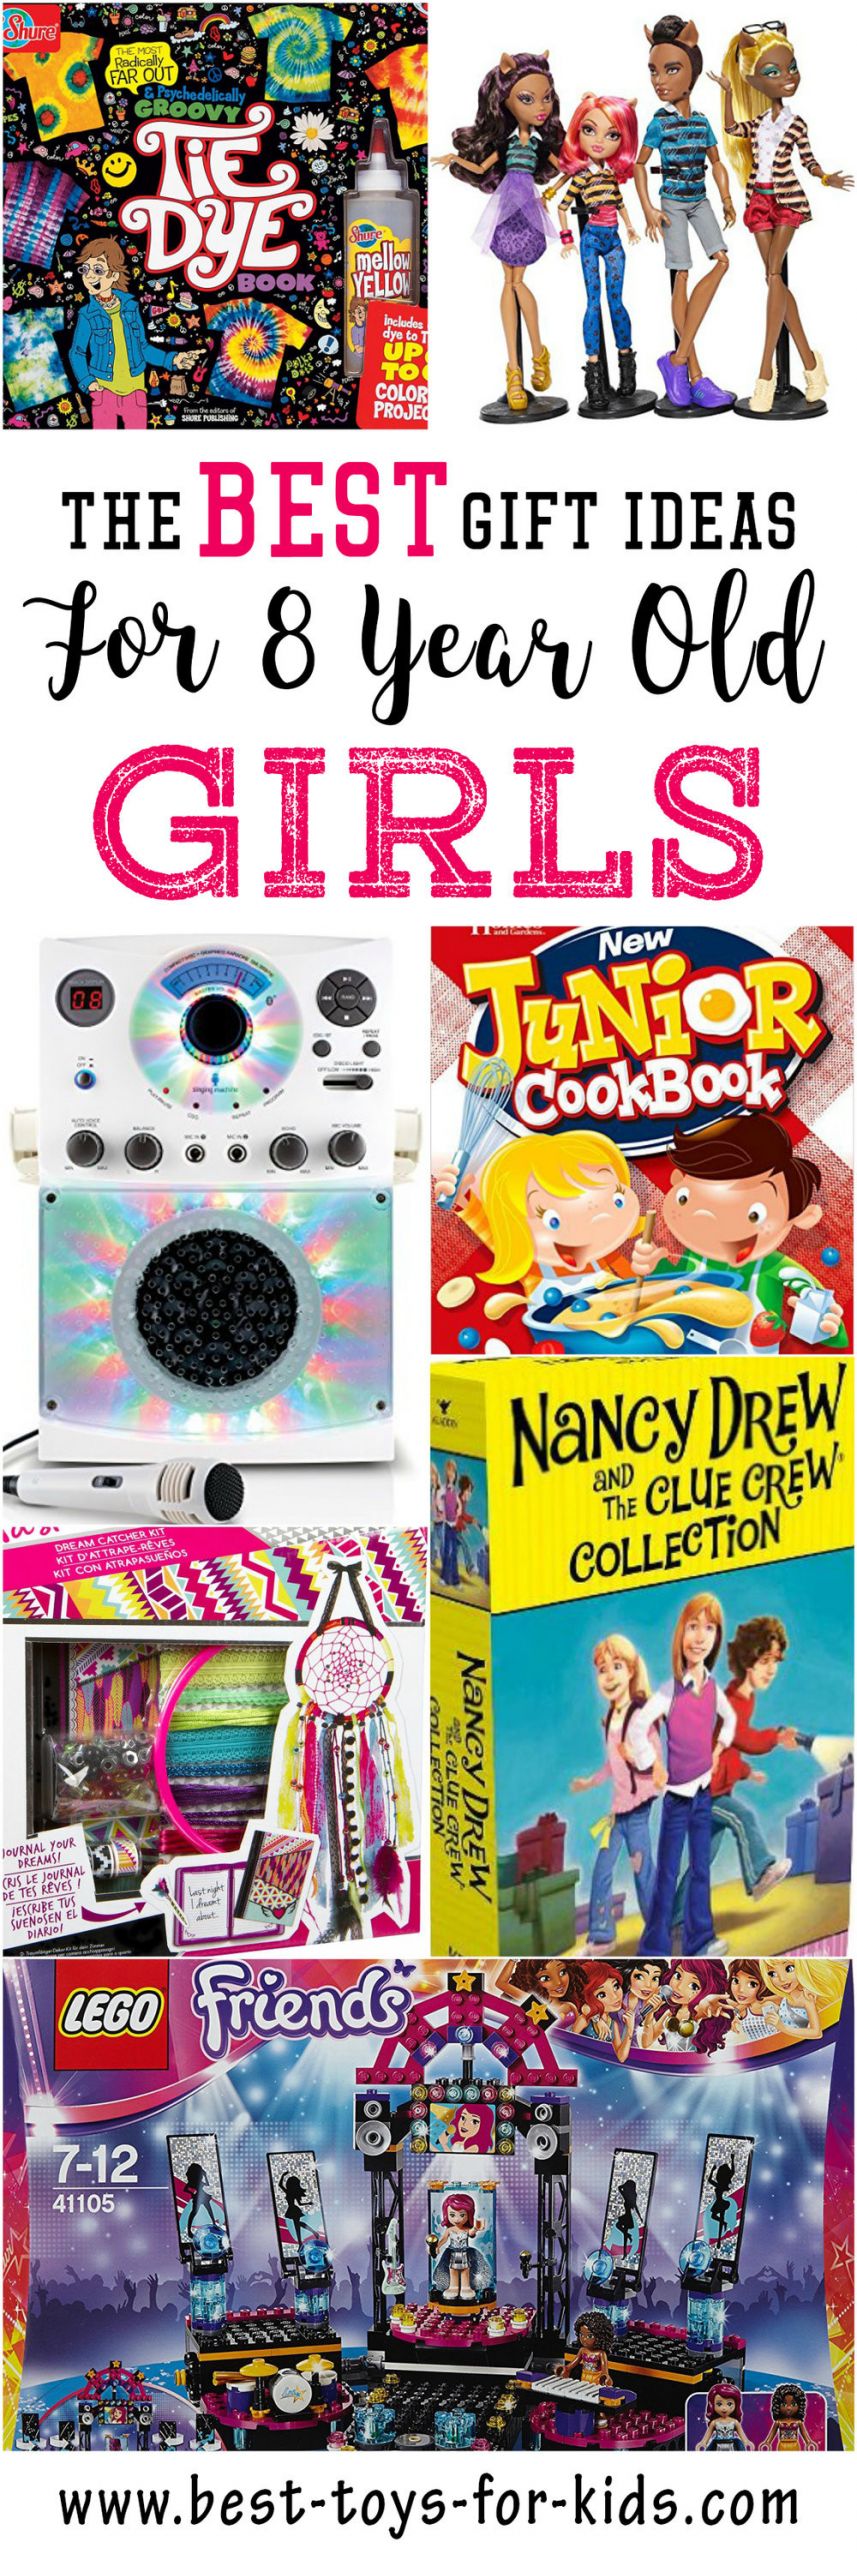 Gift Ideas For 8 Year Old Girls
 Best Gift Ideas for 8 Year Old Girls — Best Toys For Kids